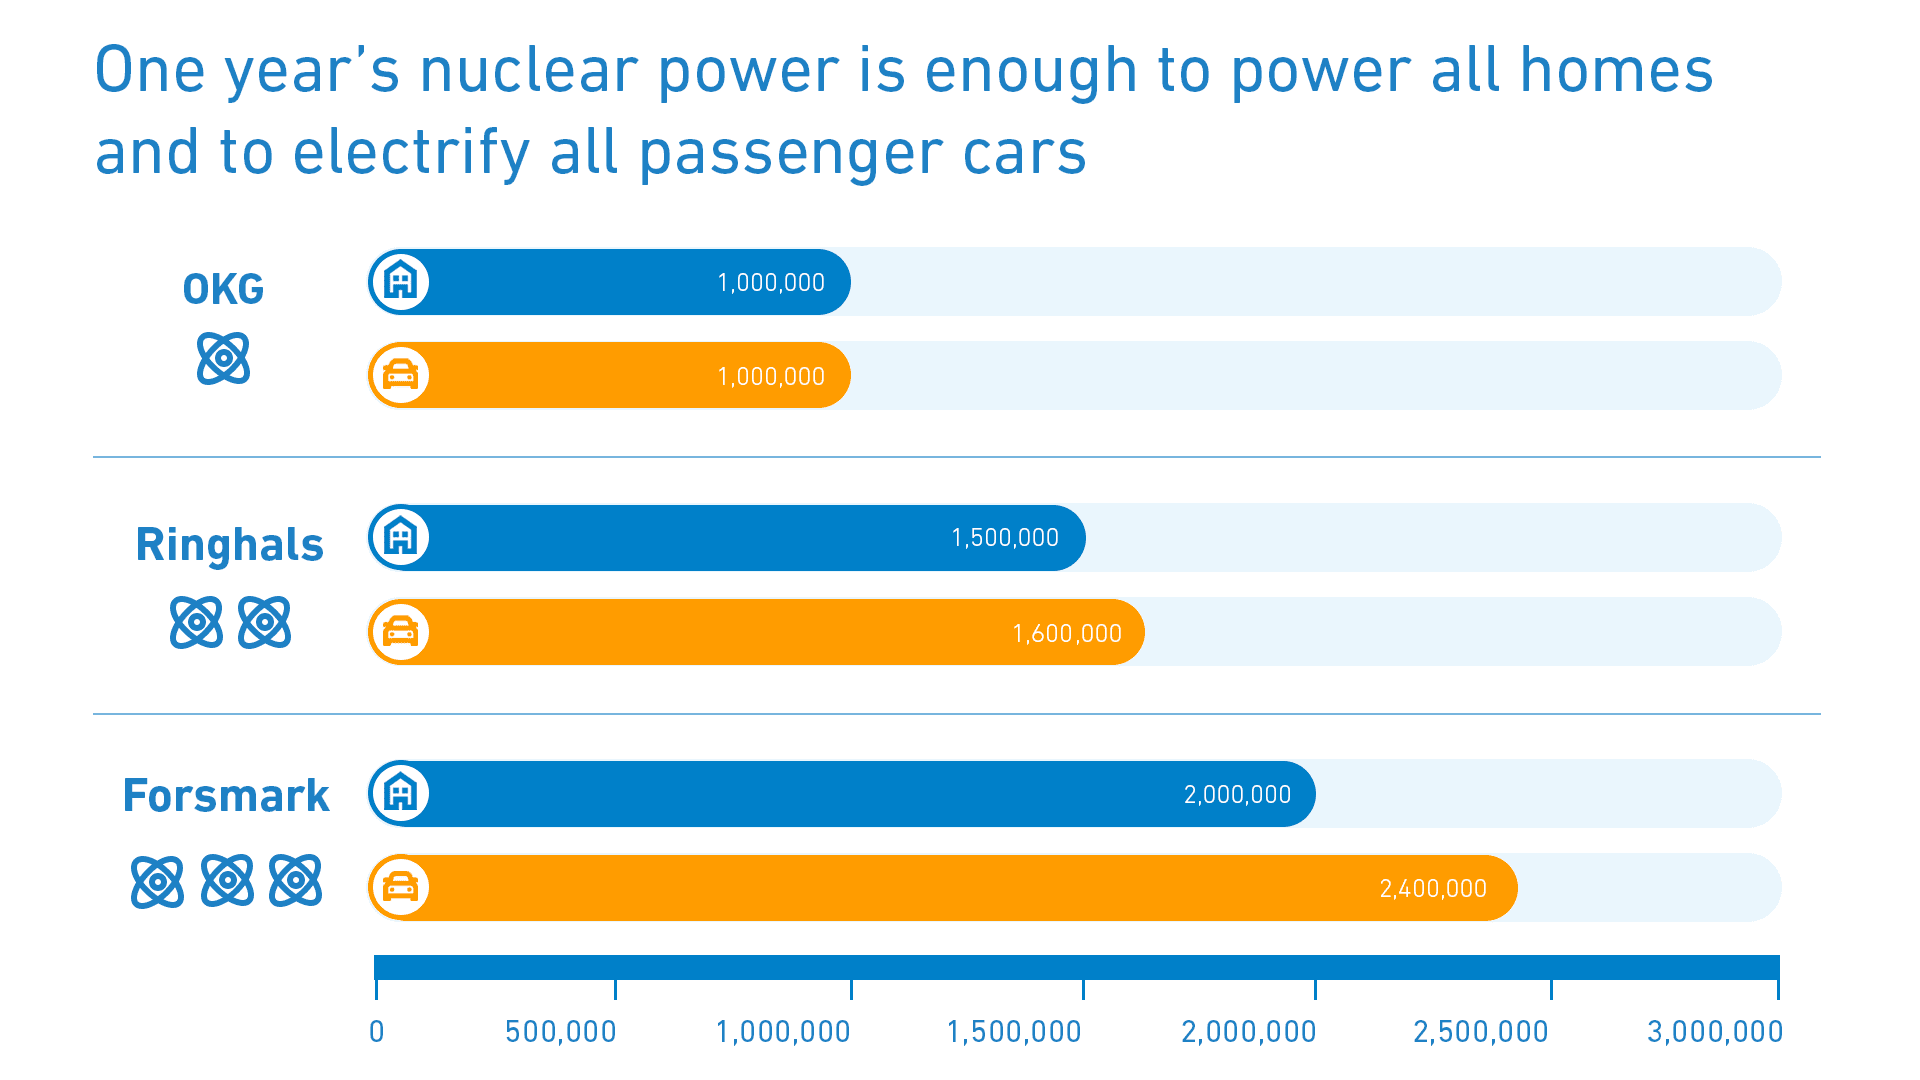 One year's nuclear power is enough to power all homes and to electrify all passenger cars